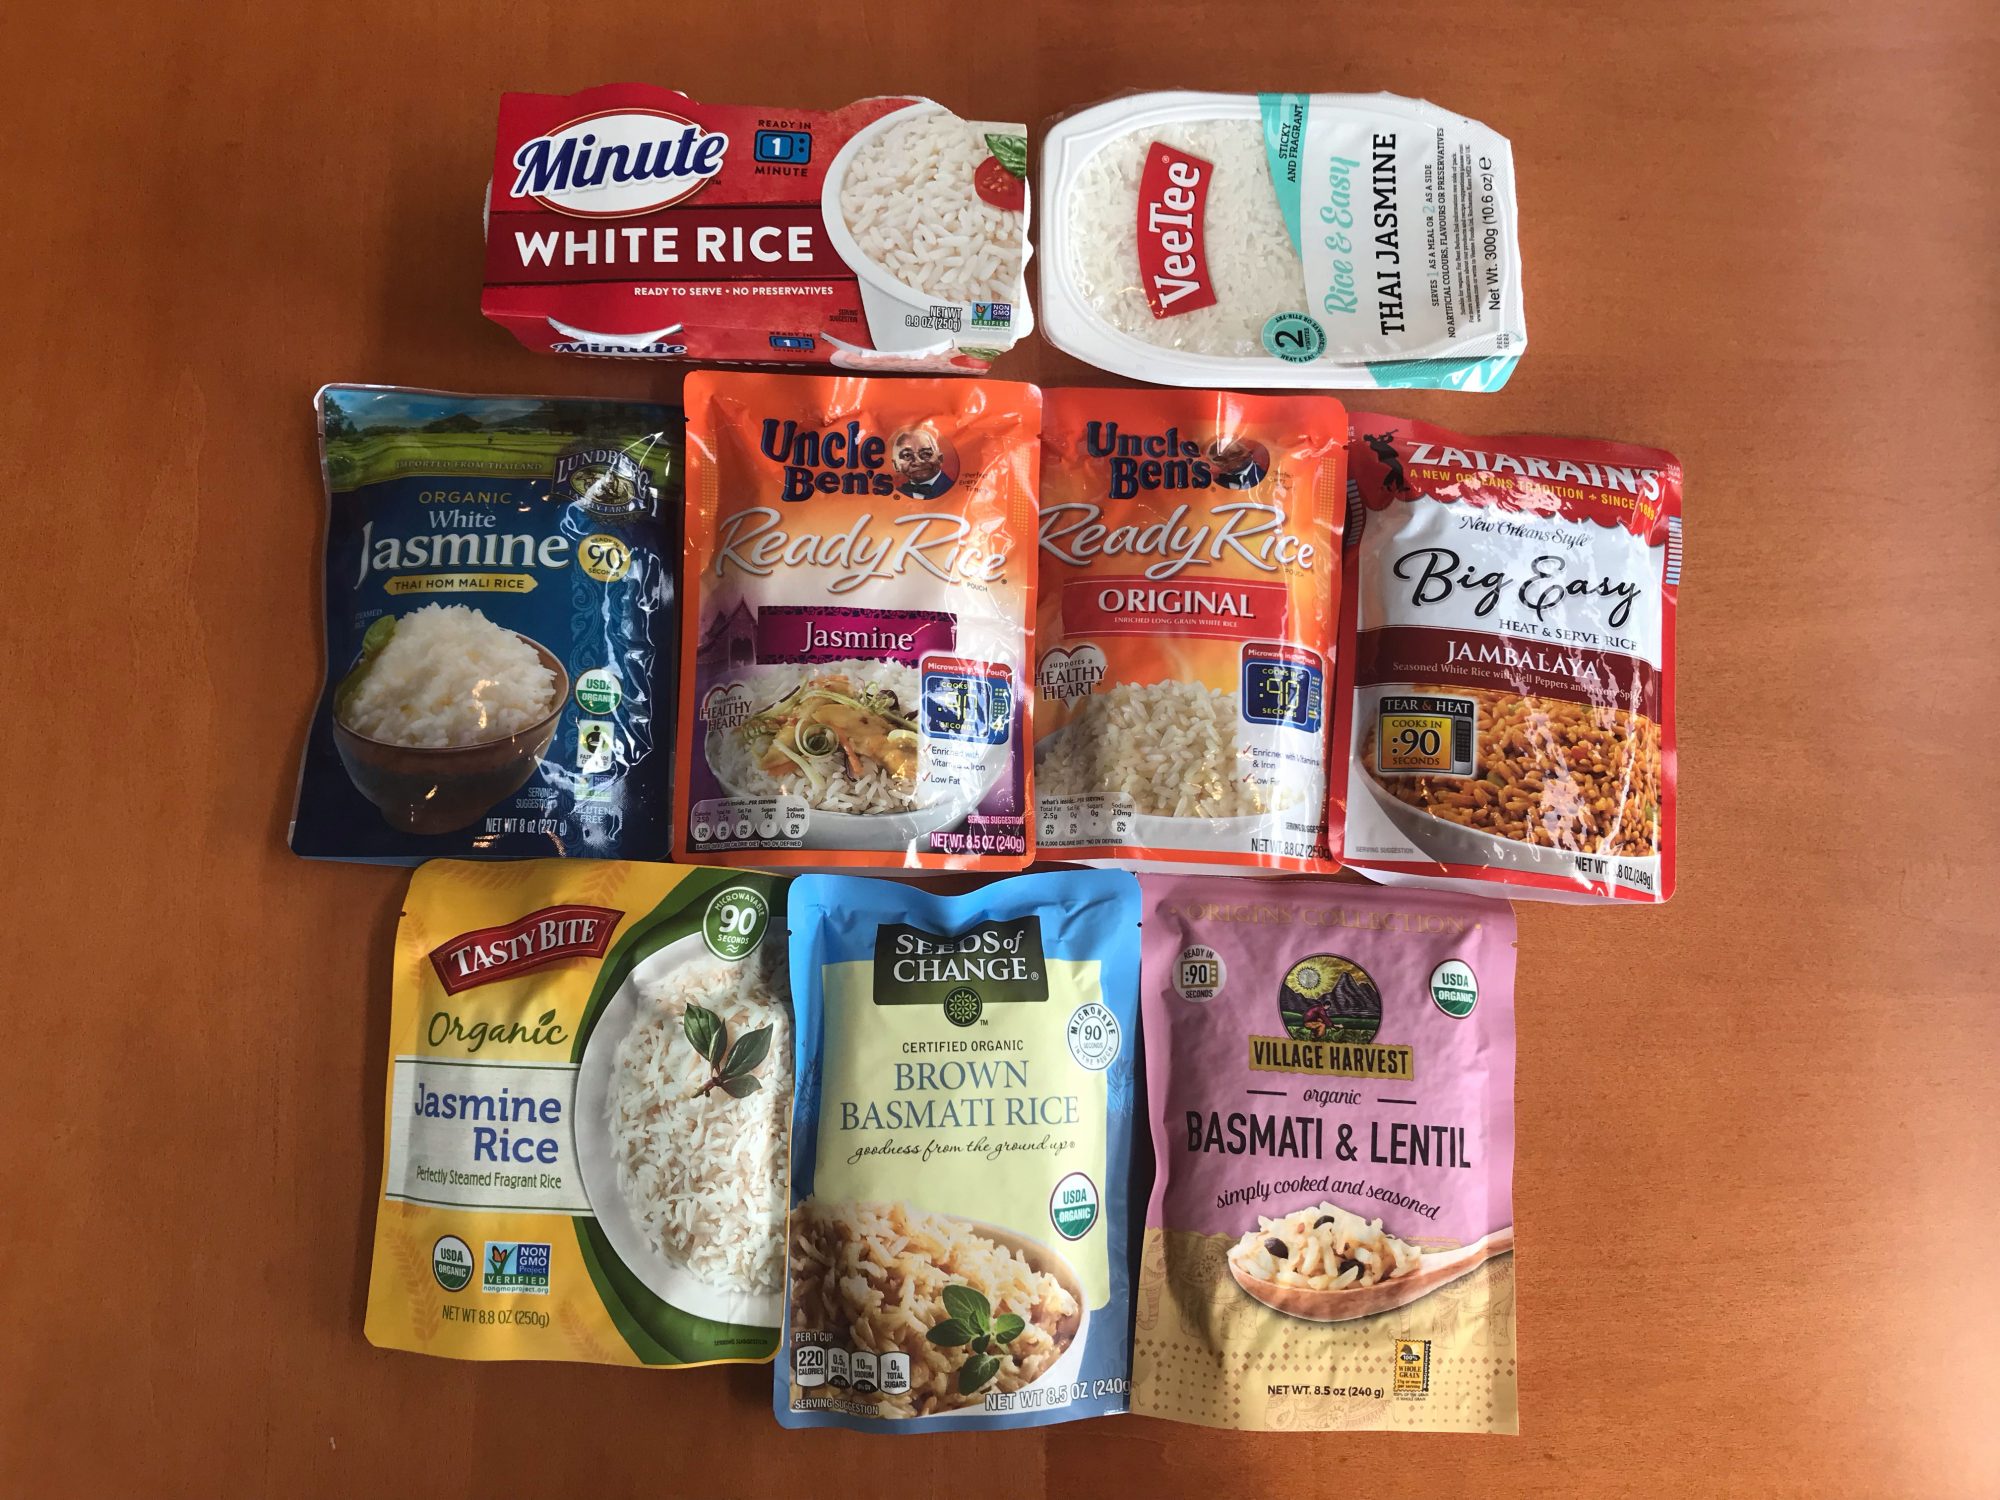 We Tried 9 Microwavable Rice PacketsThese Are The Ones Worth Buying   MyRecipes